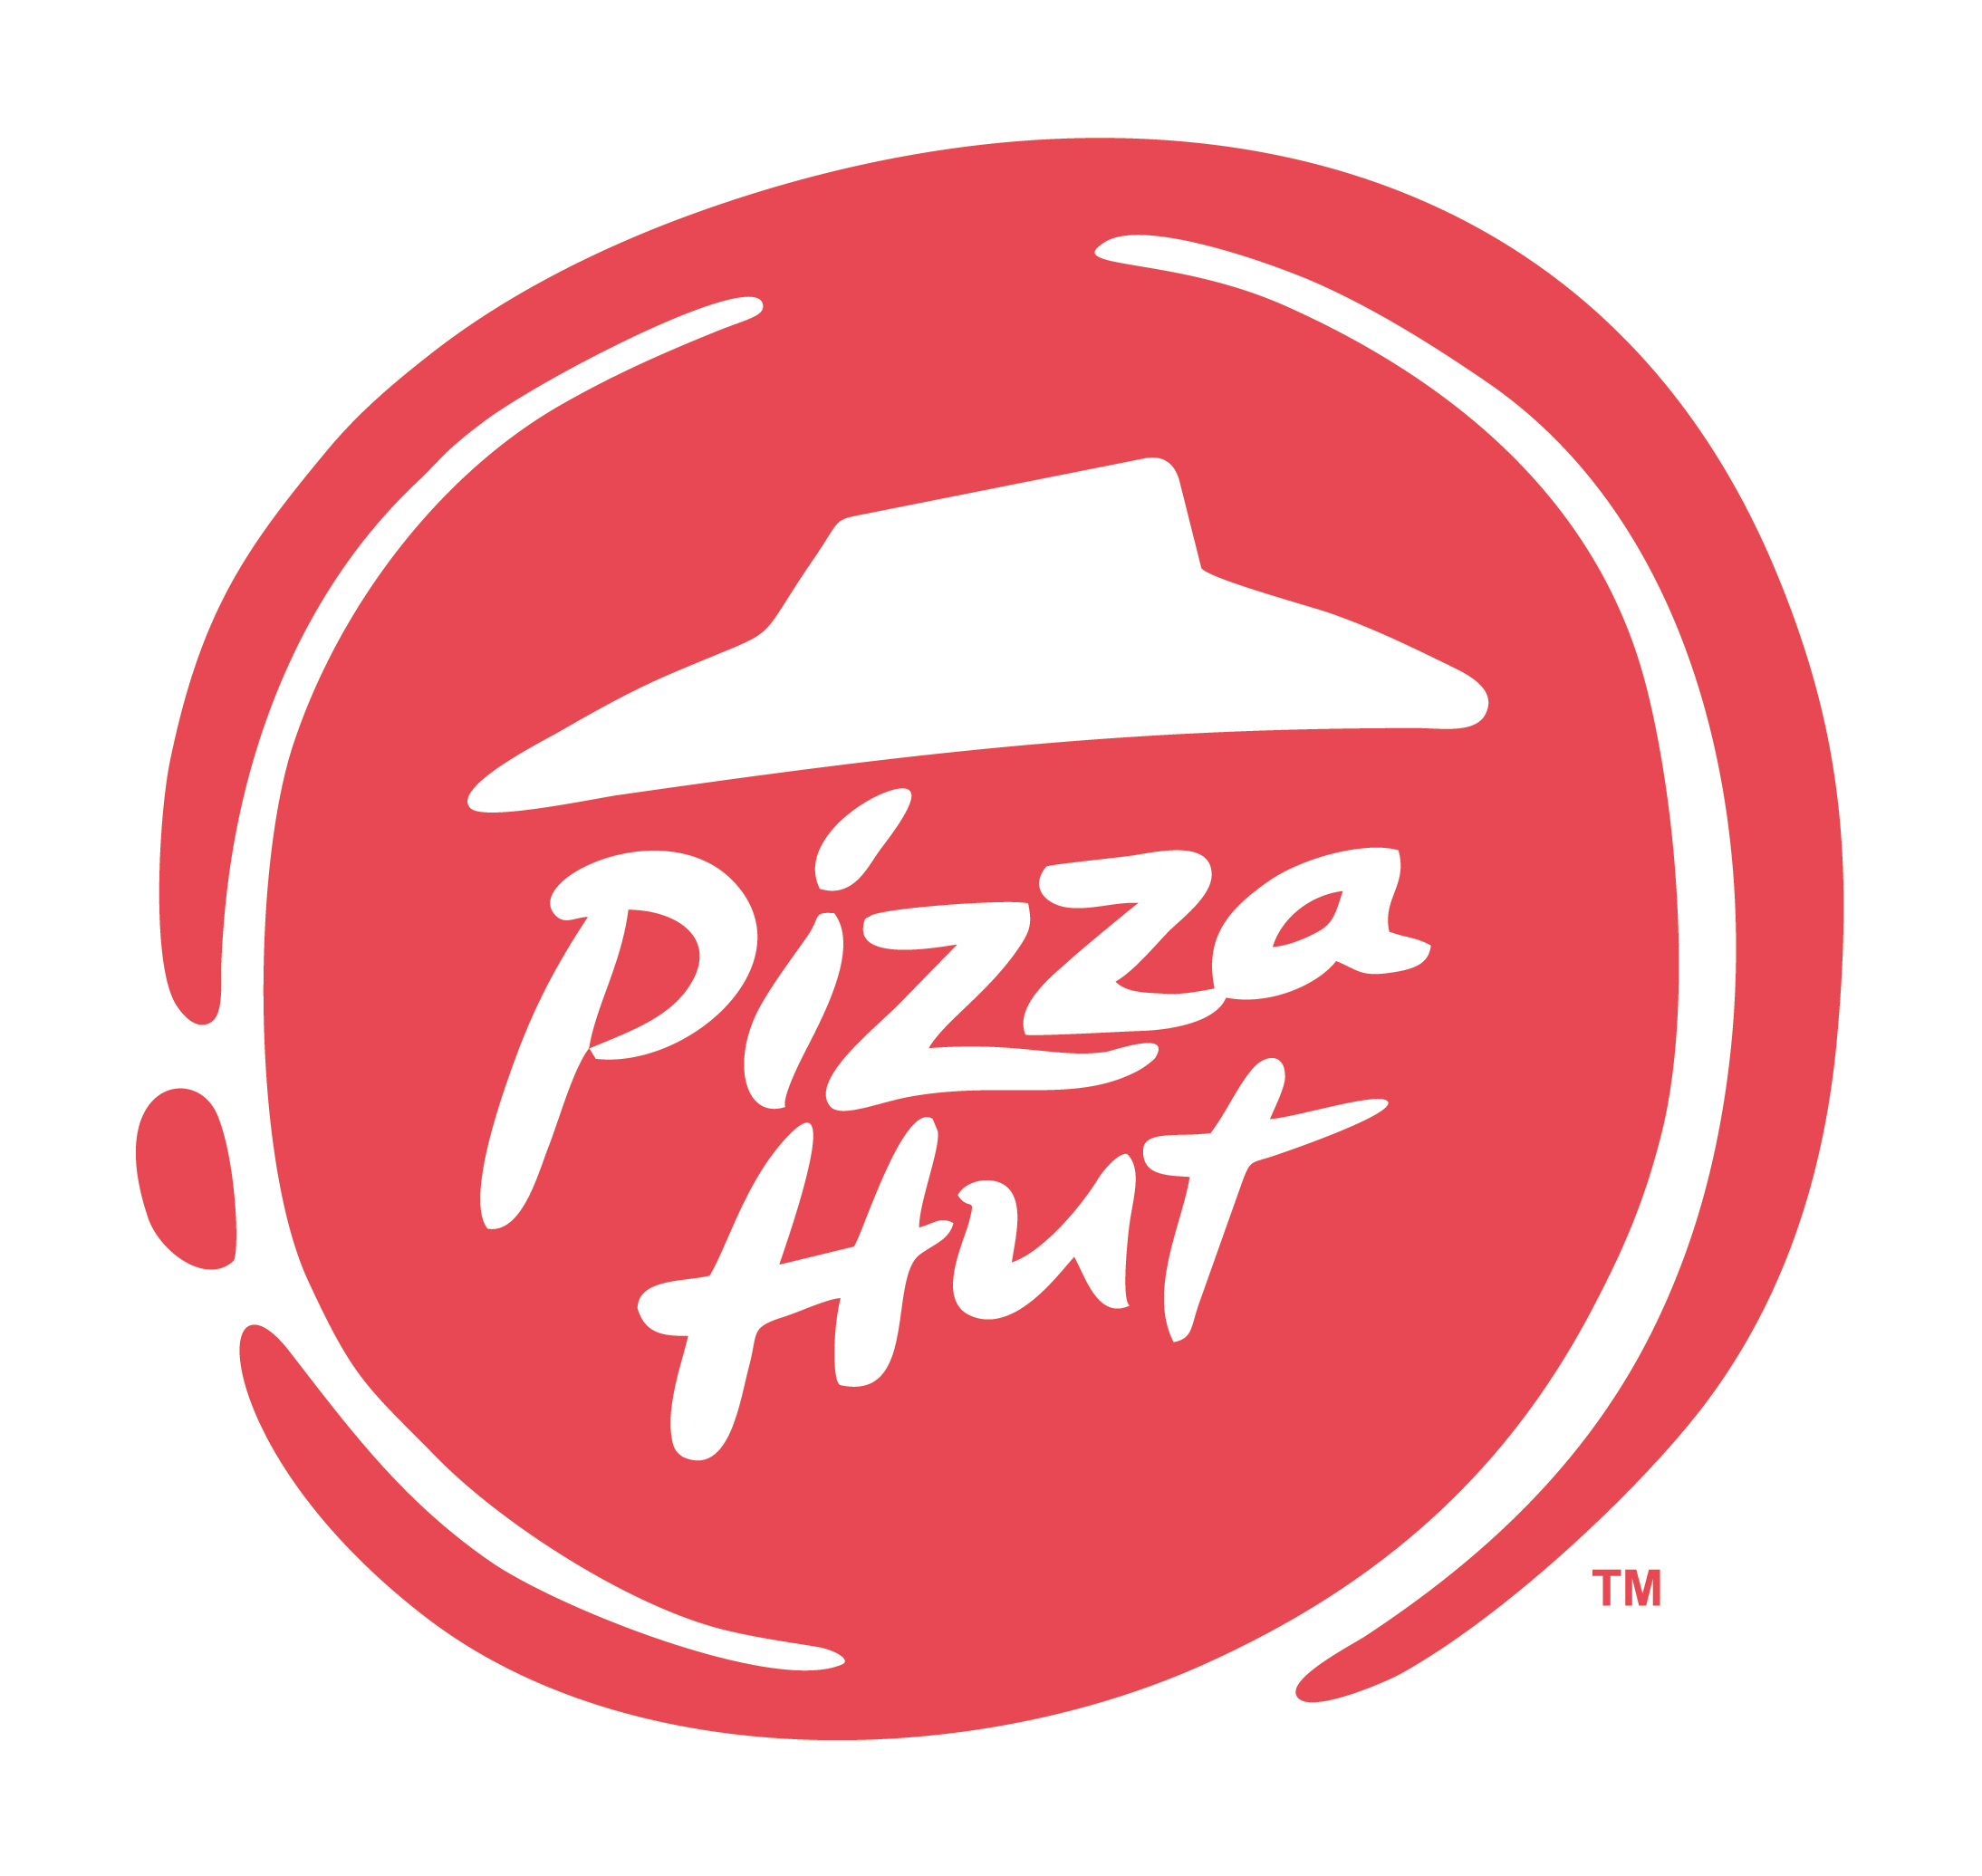 Pizza Hut(R) BOOK IT! Beginners(R) Celebrates Ten Years of Encouraging Young Children to Read Image.